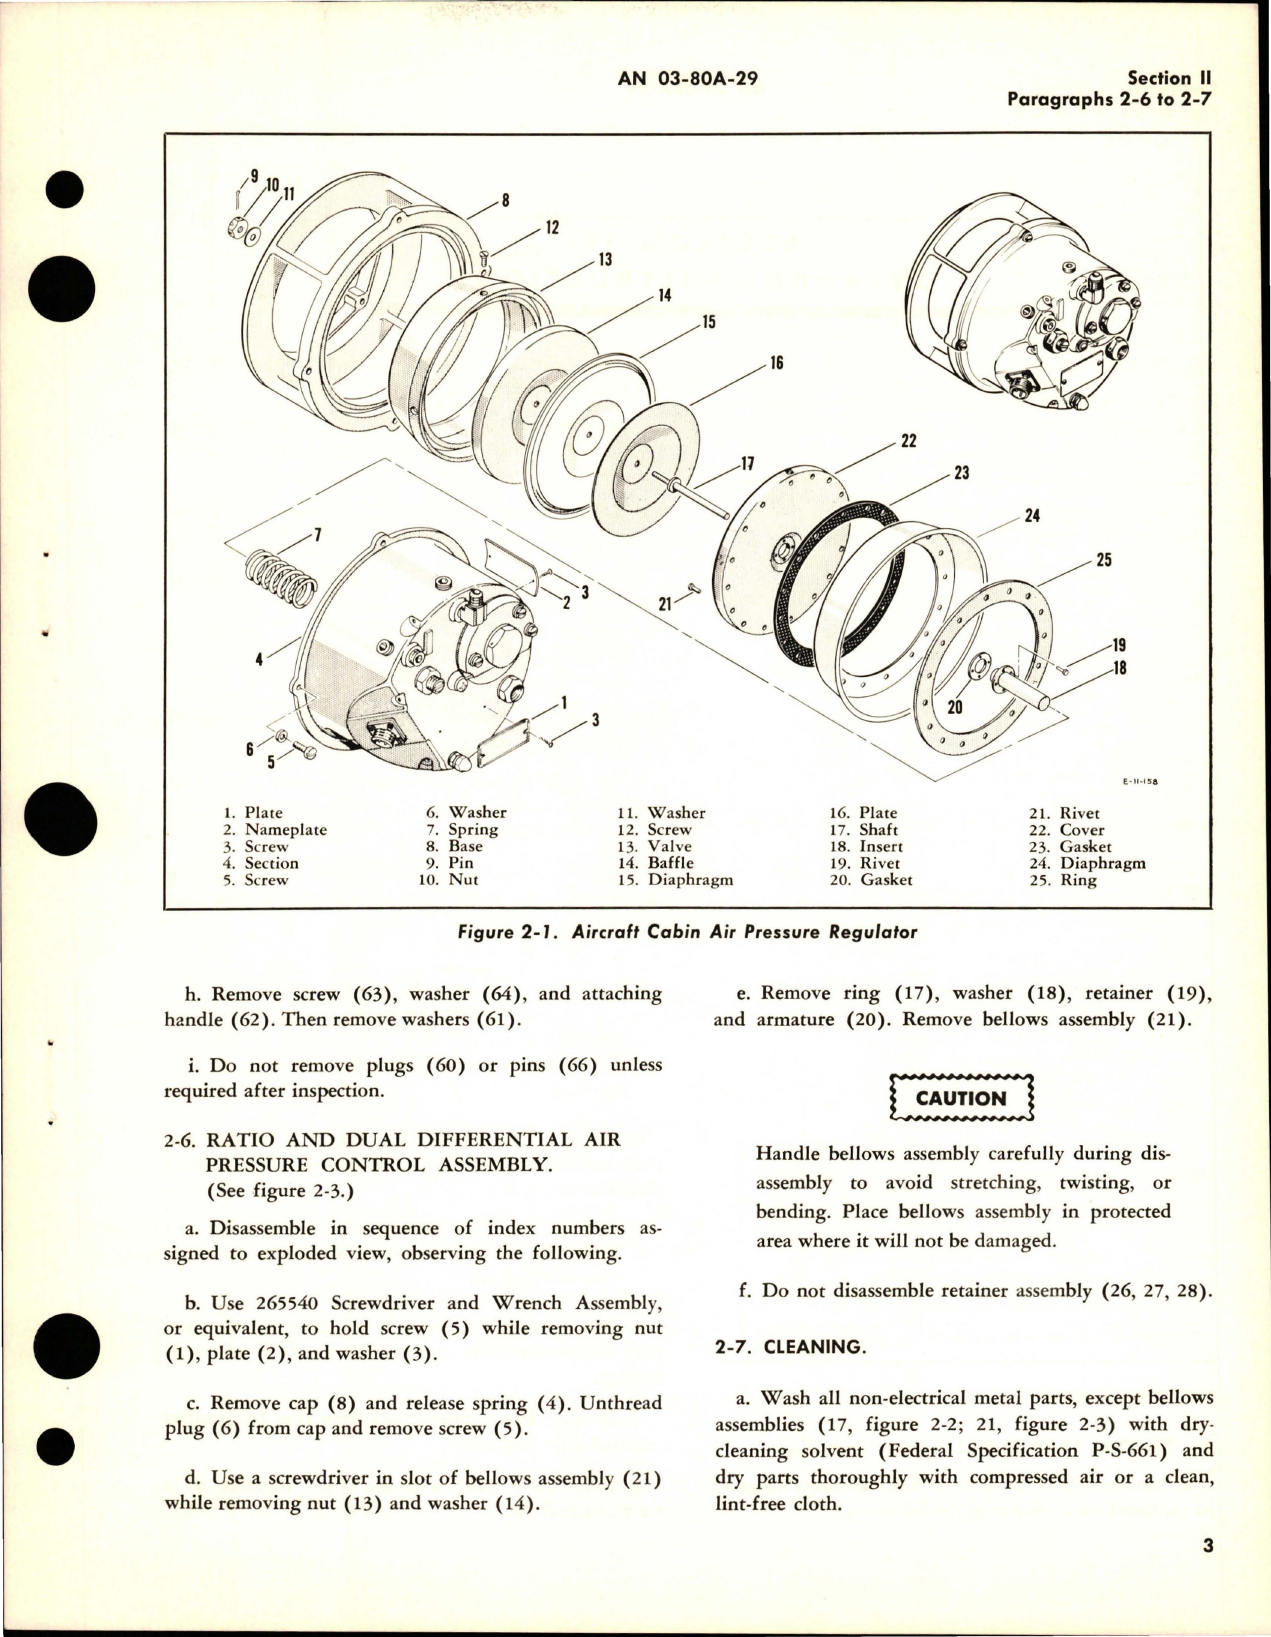 Sample page 7 from AirCorps Library document: Overhaul Instructions for Aircraft Cabin Air Pressure Regulators - Parts 14600-5-33 and 14600-5-33-3 - Model CPR1-8